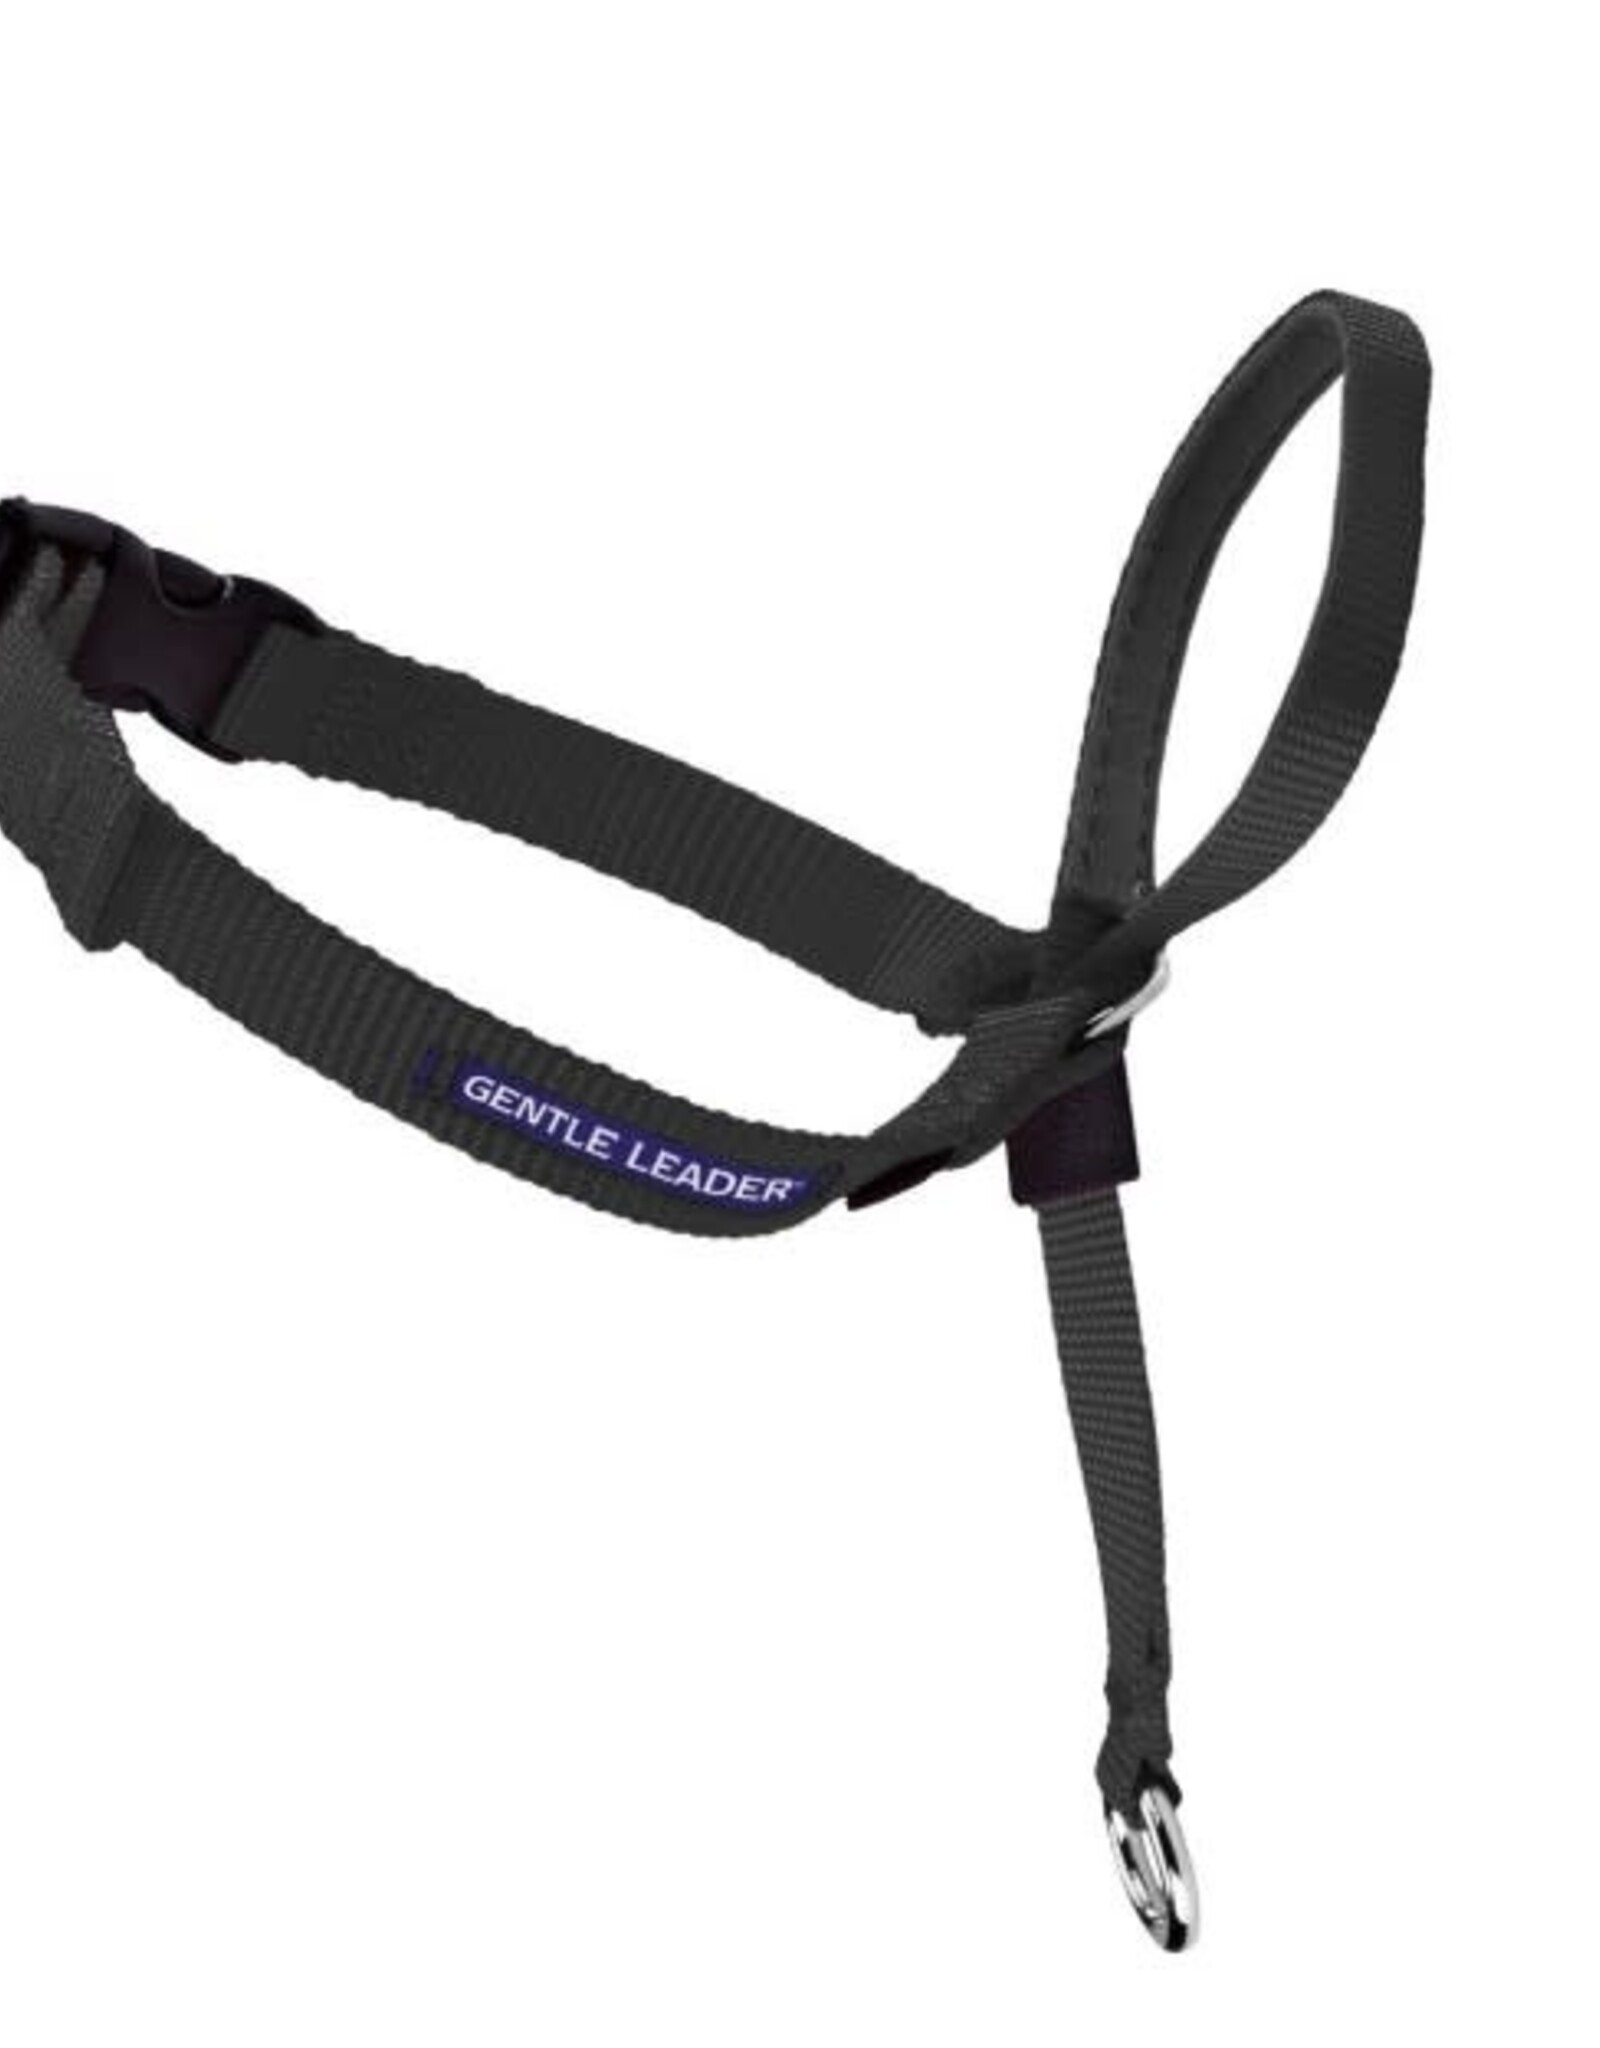 RADIO SYSTEMS CORP(PET SAFE) Gentle Leader Headcollar Quick Release Small Black